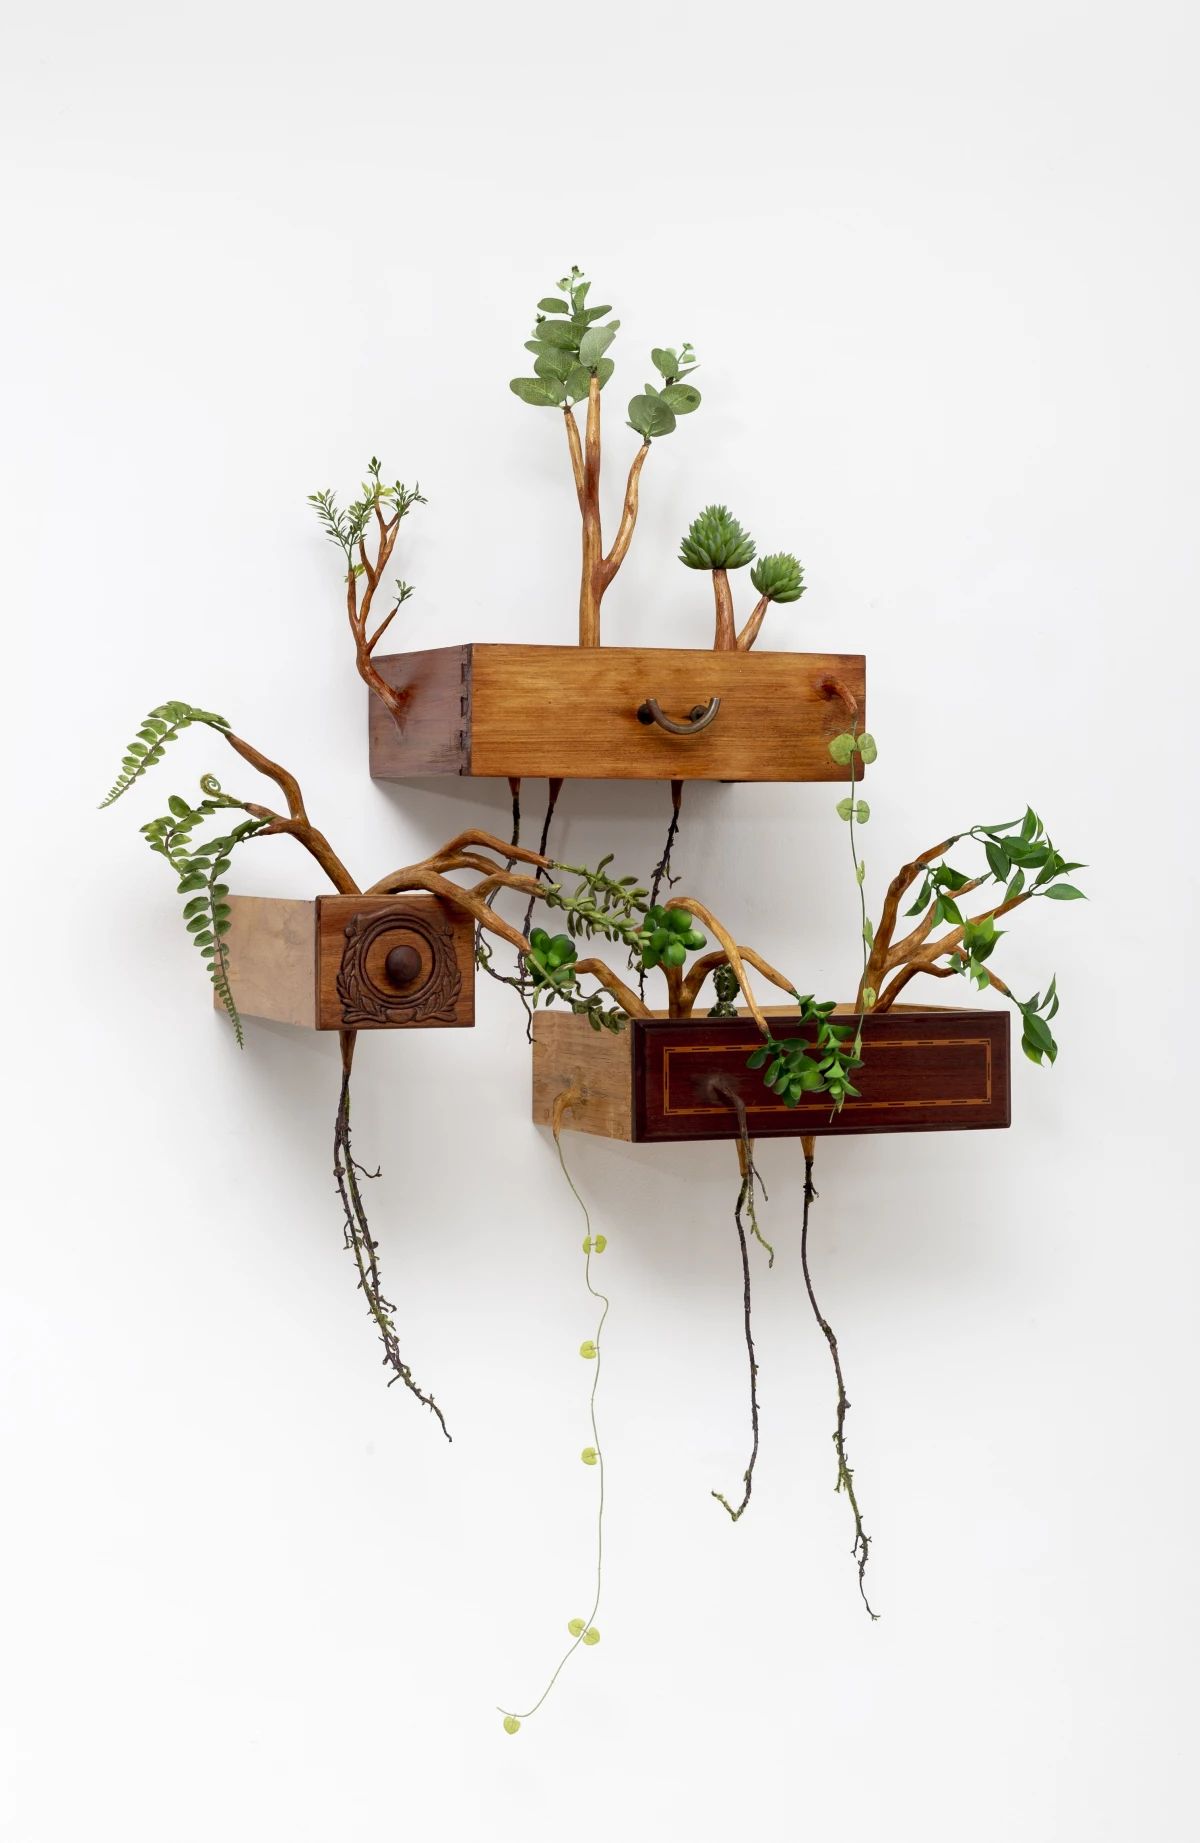 Art And Nature Humorous Wooden Sculptures With Sprouted Wooden Limbs By Camille Kachani 1